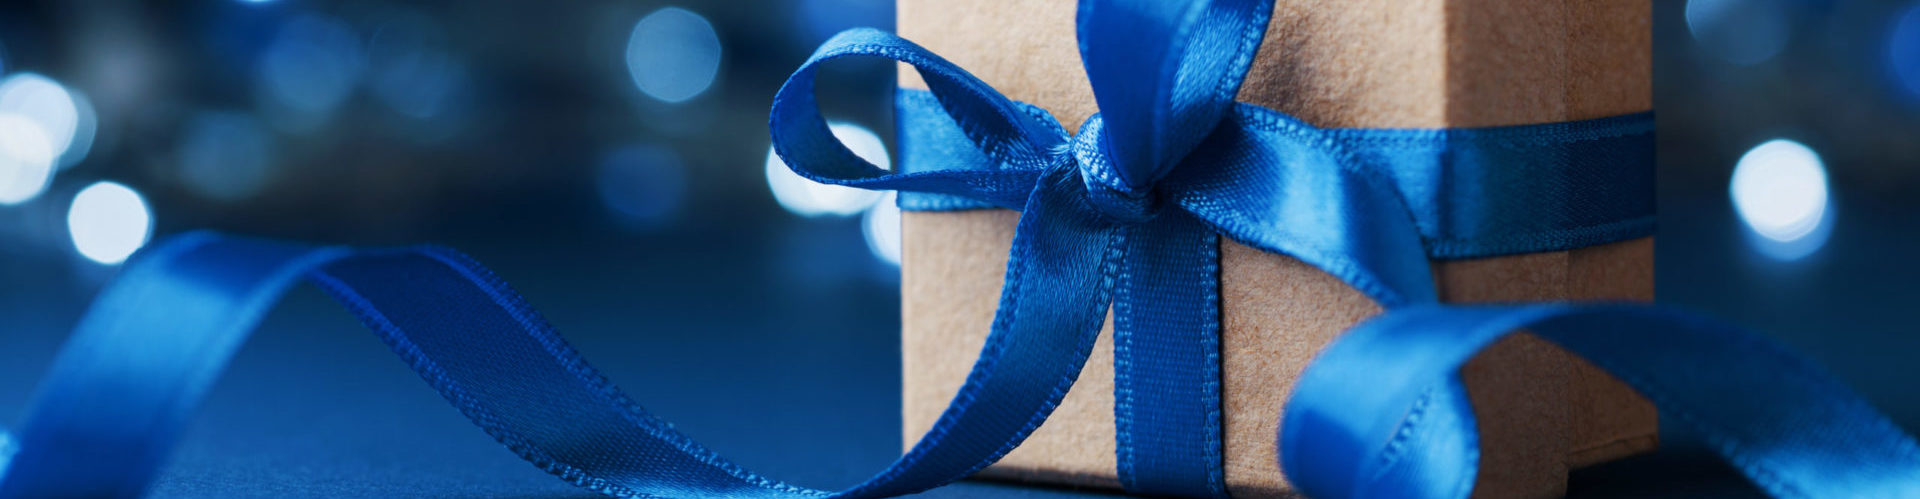 2022 holiday ecommerce strategy - gift box with blue ribbon and blue background